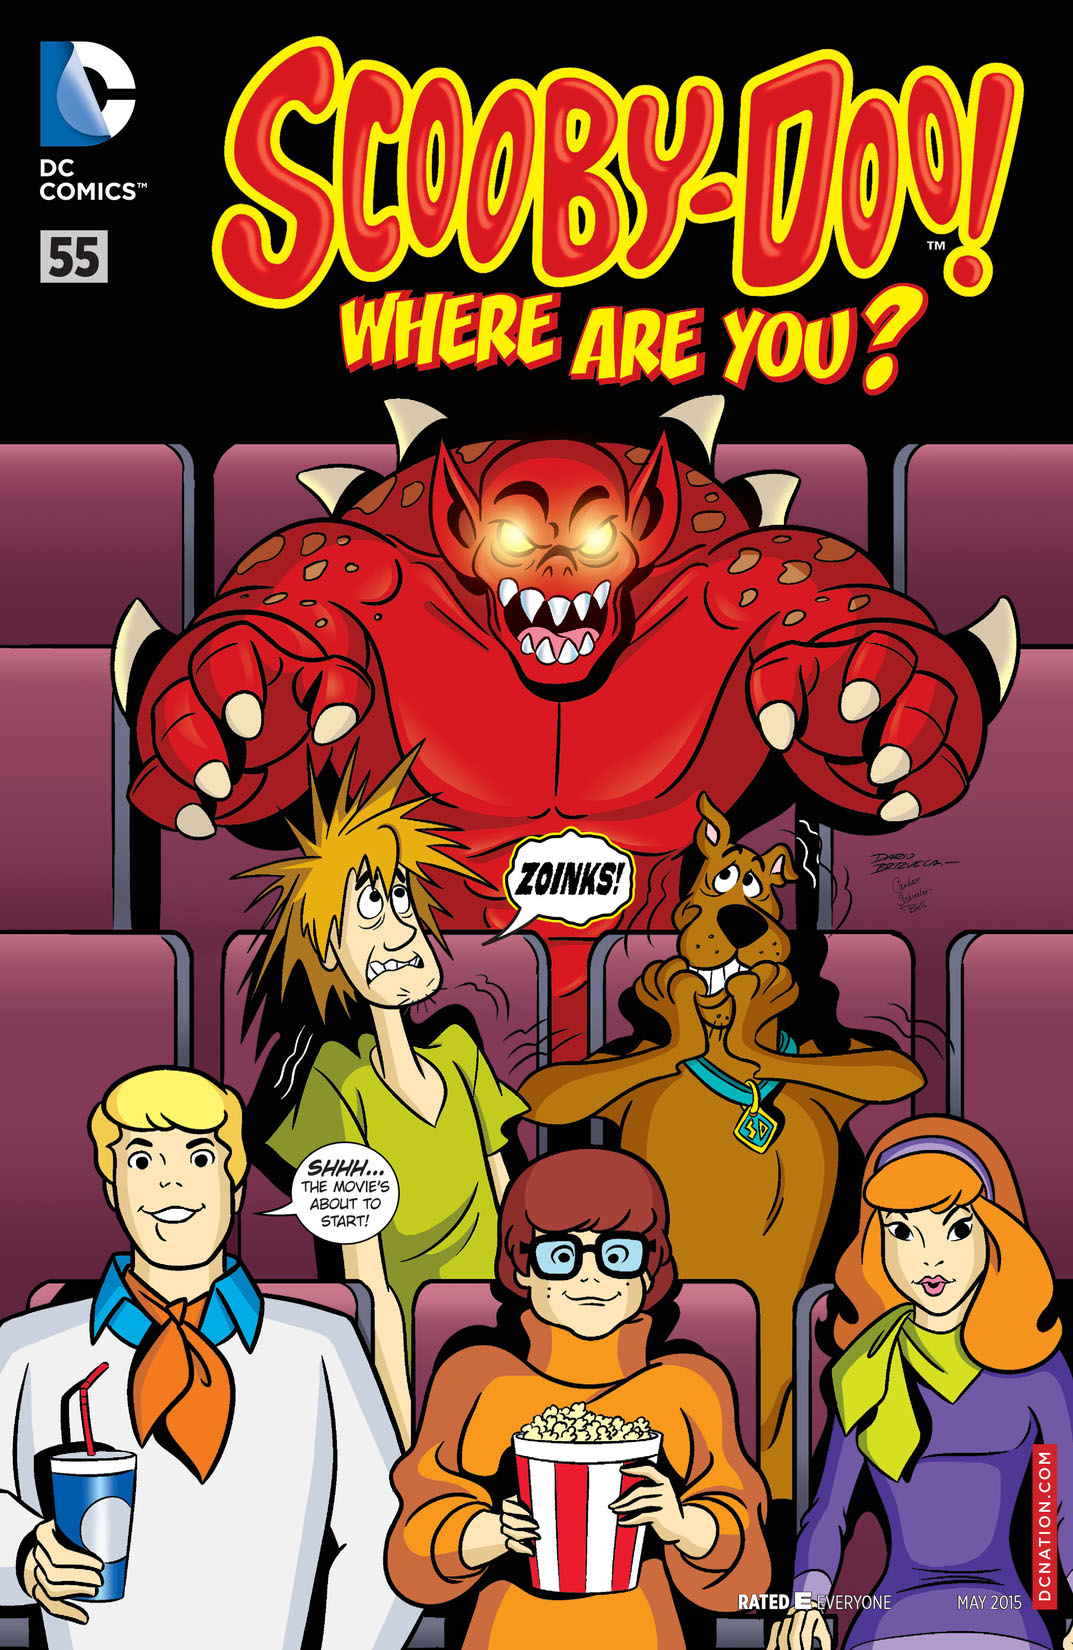 Scooby-Doo, Where Are You? #55 preview images